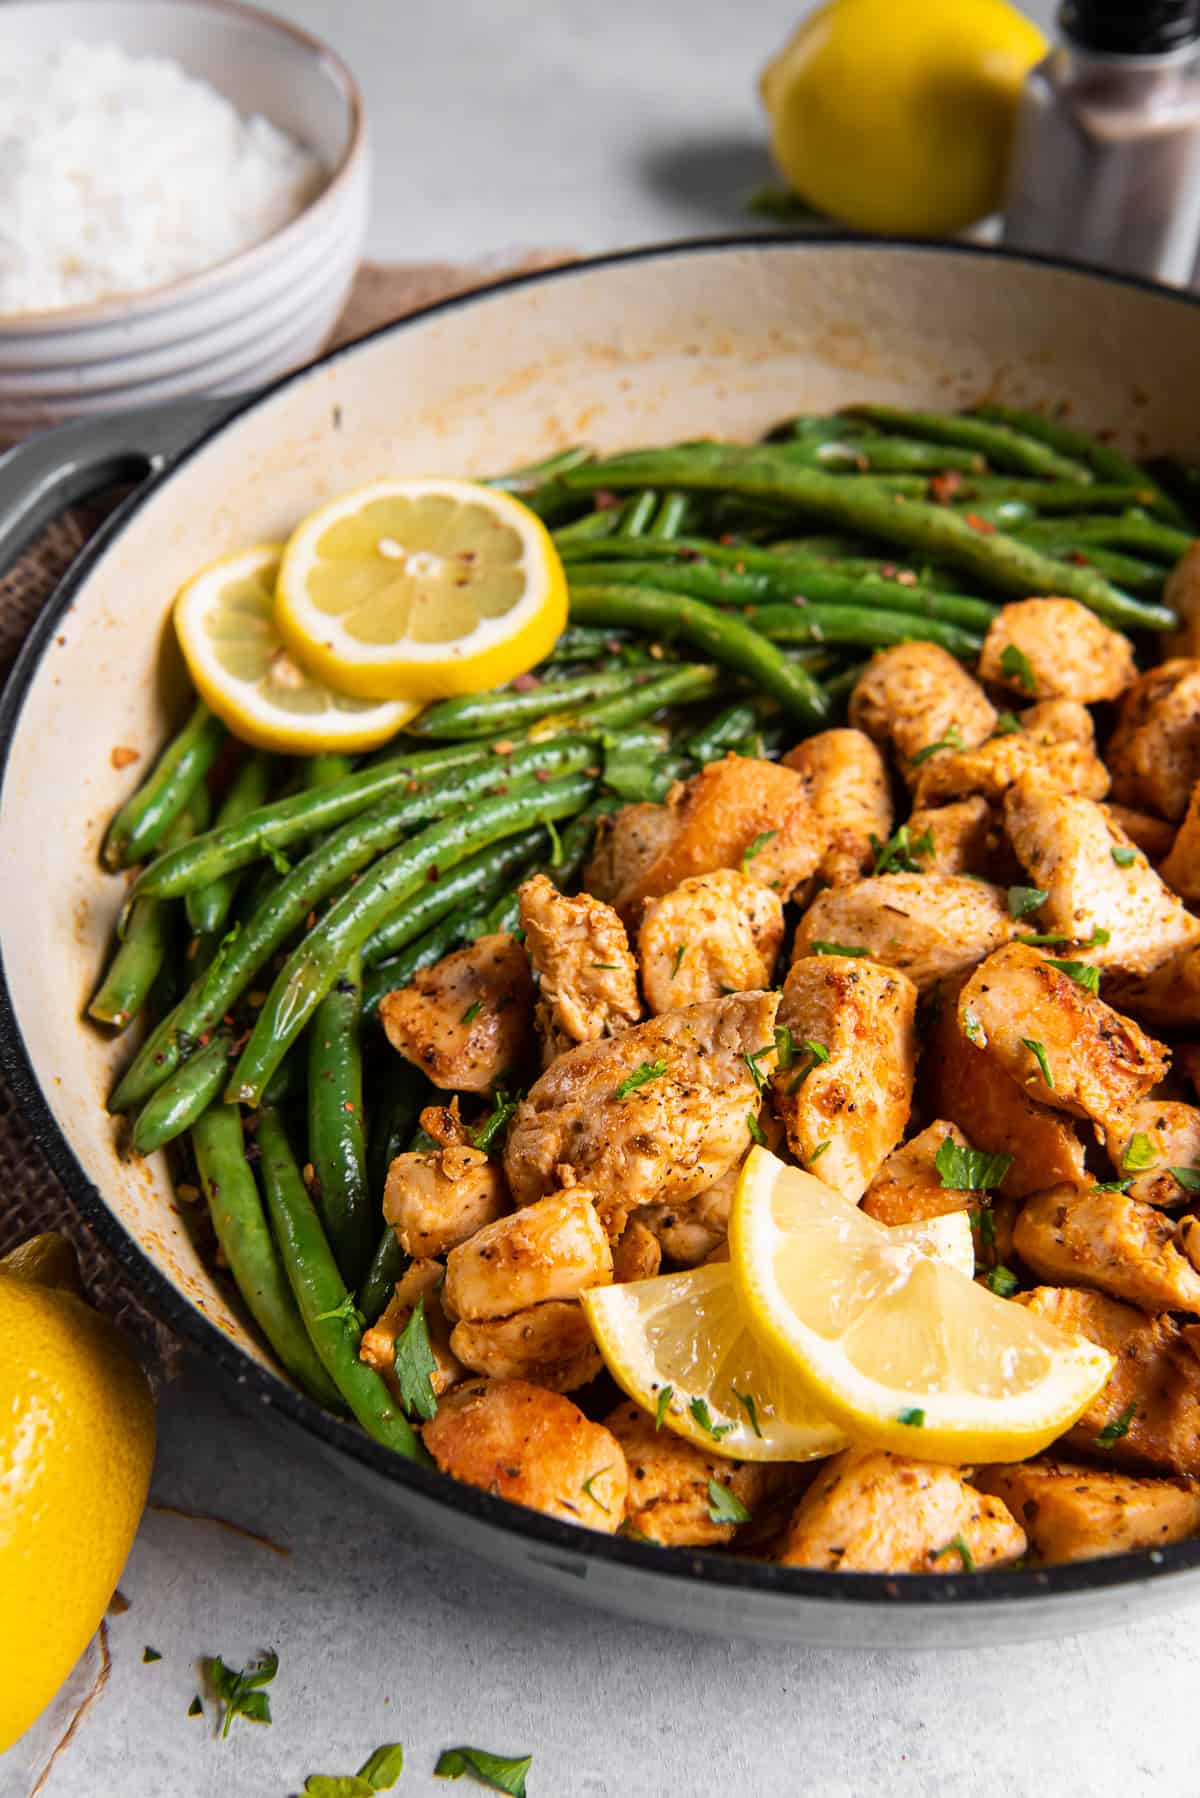 A side view of cooked chicken chunks and green beans in a skillet with lemon slices.